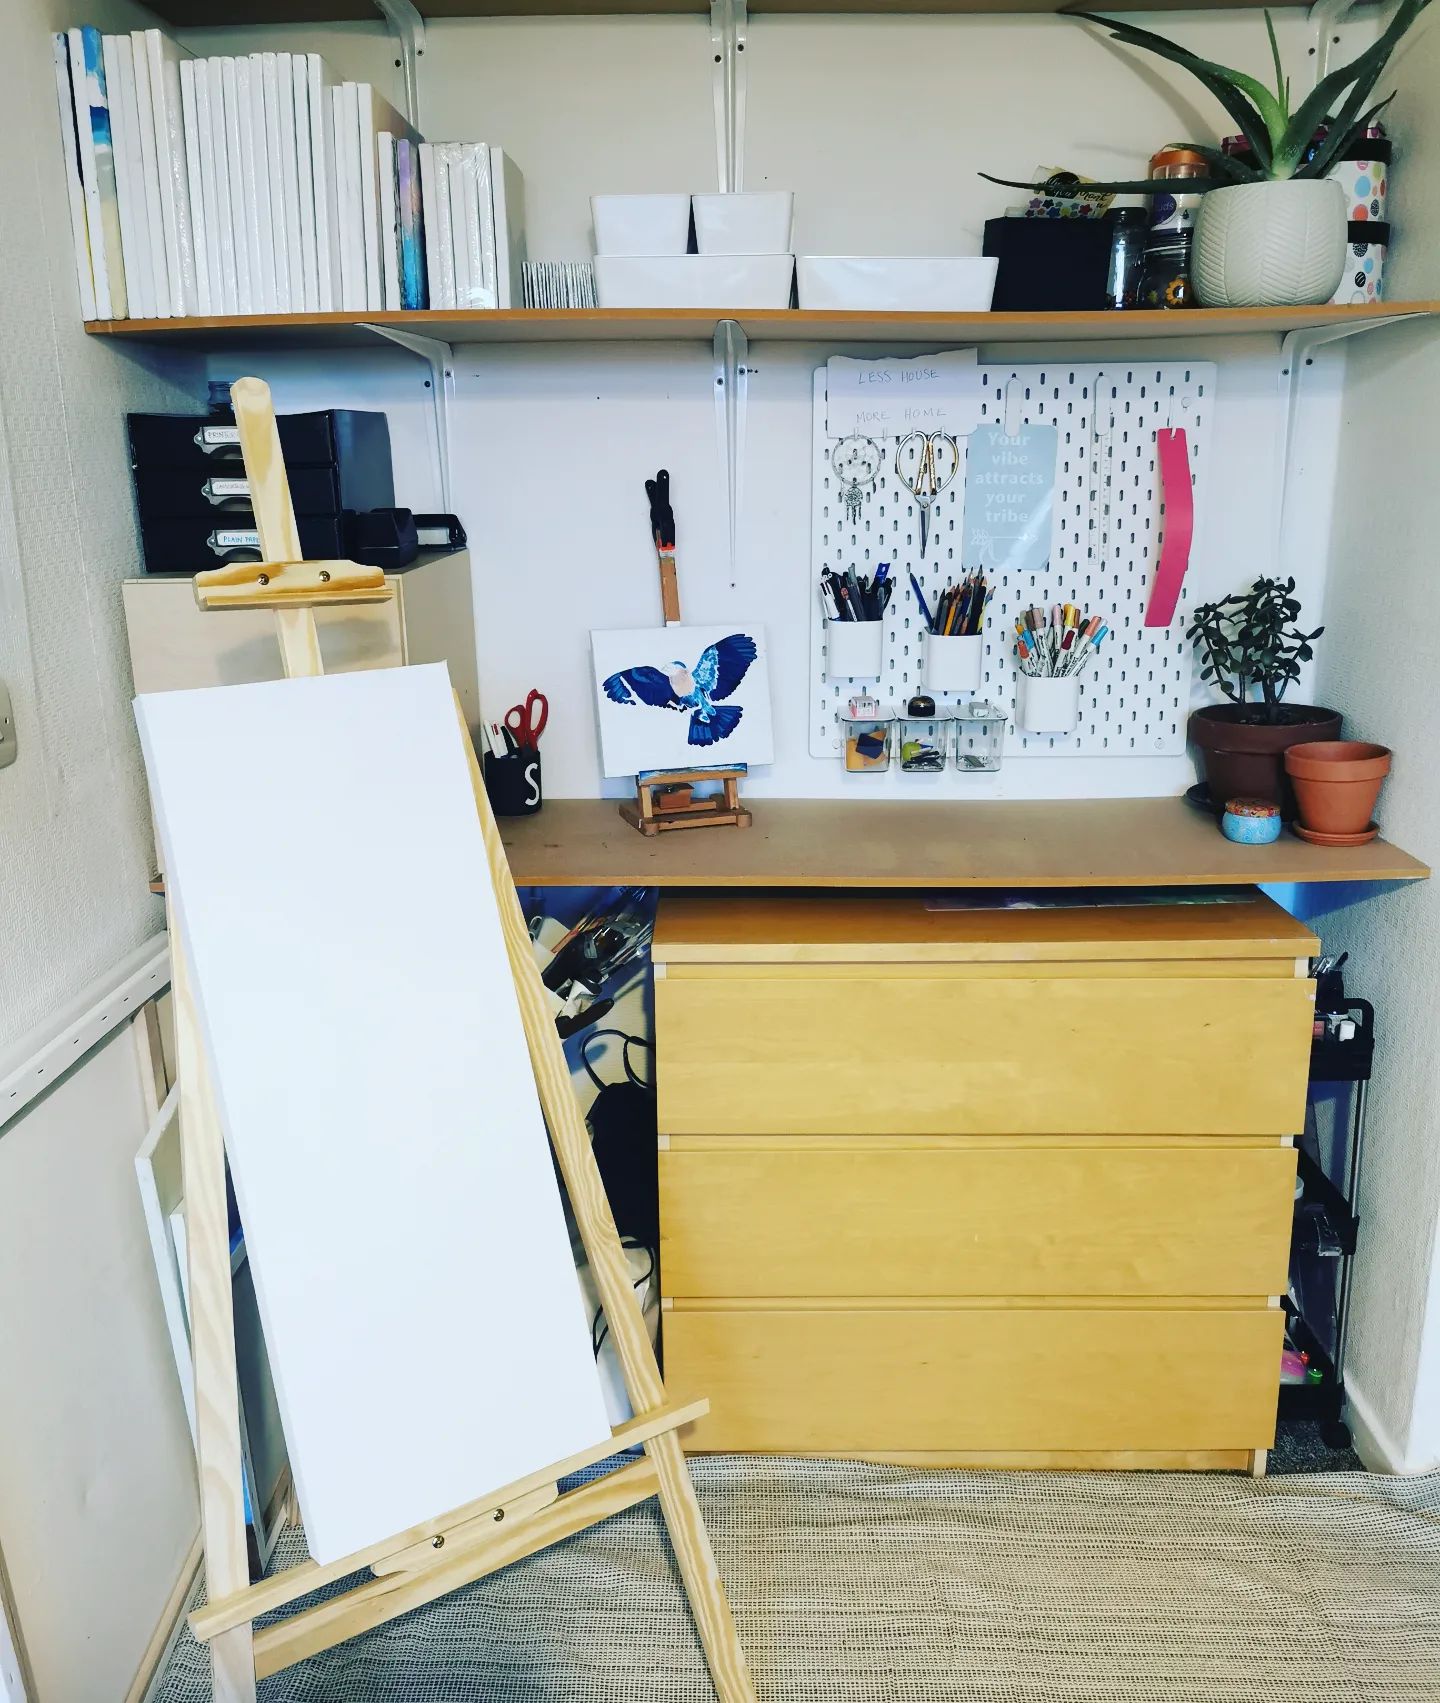 Craft room and art studio with an easel and a pegboard for supplies. Photo by Instagram user @rainbowsbysammy